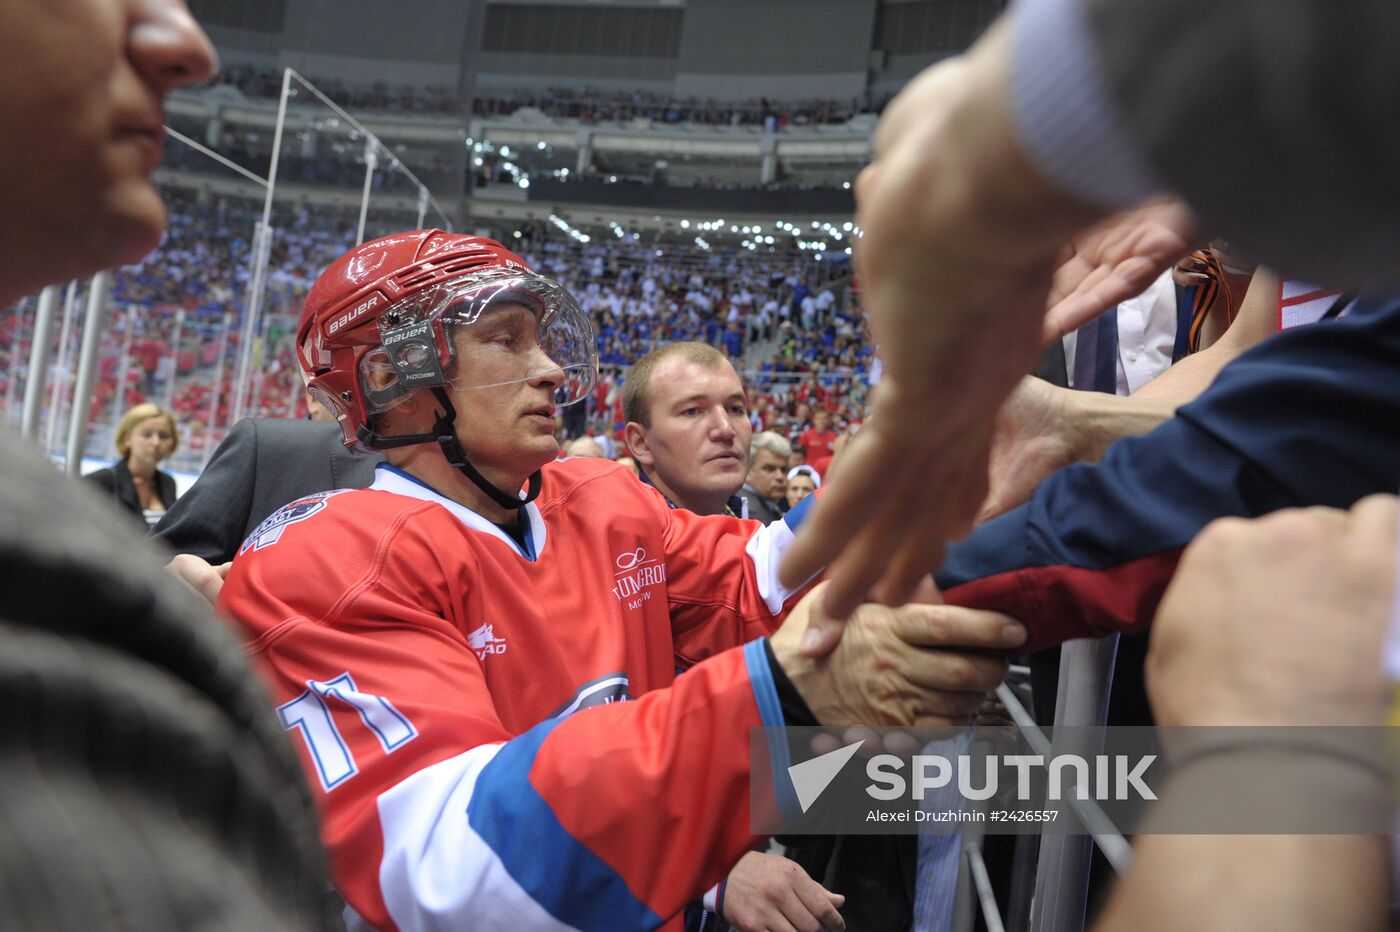 Vladimir Putin takes part in gala match at Russian Amateur Ice Hockey Festival